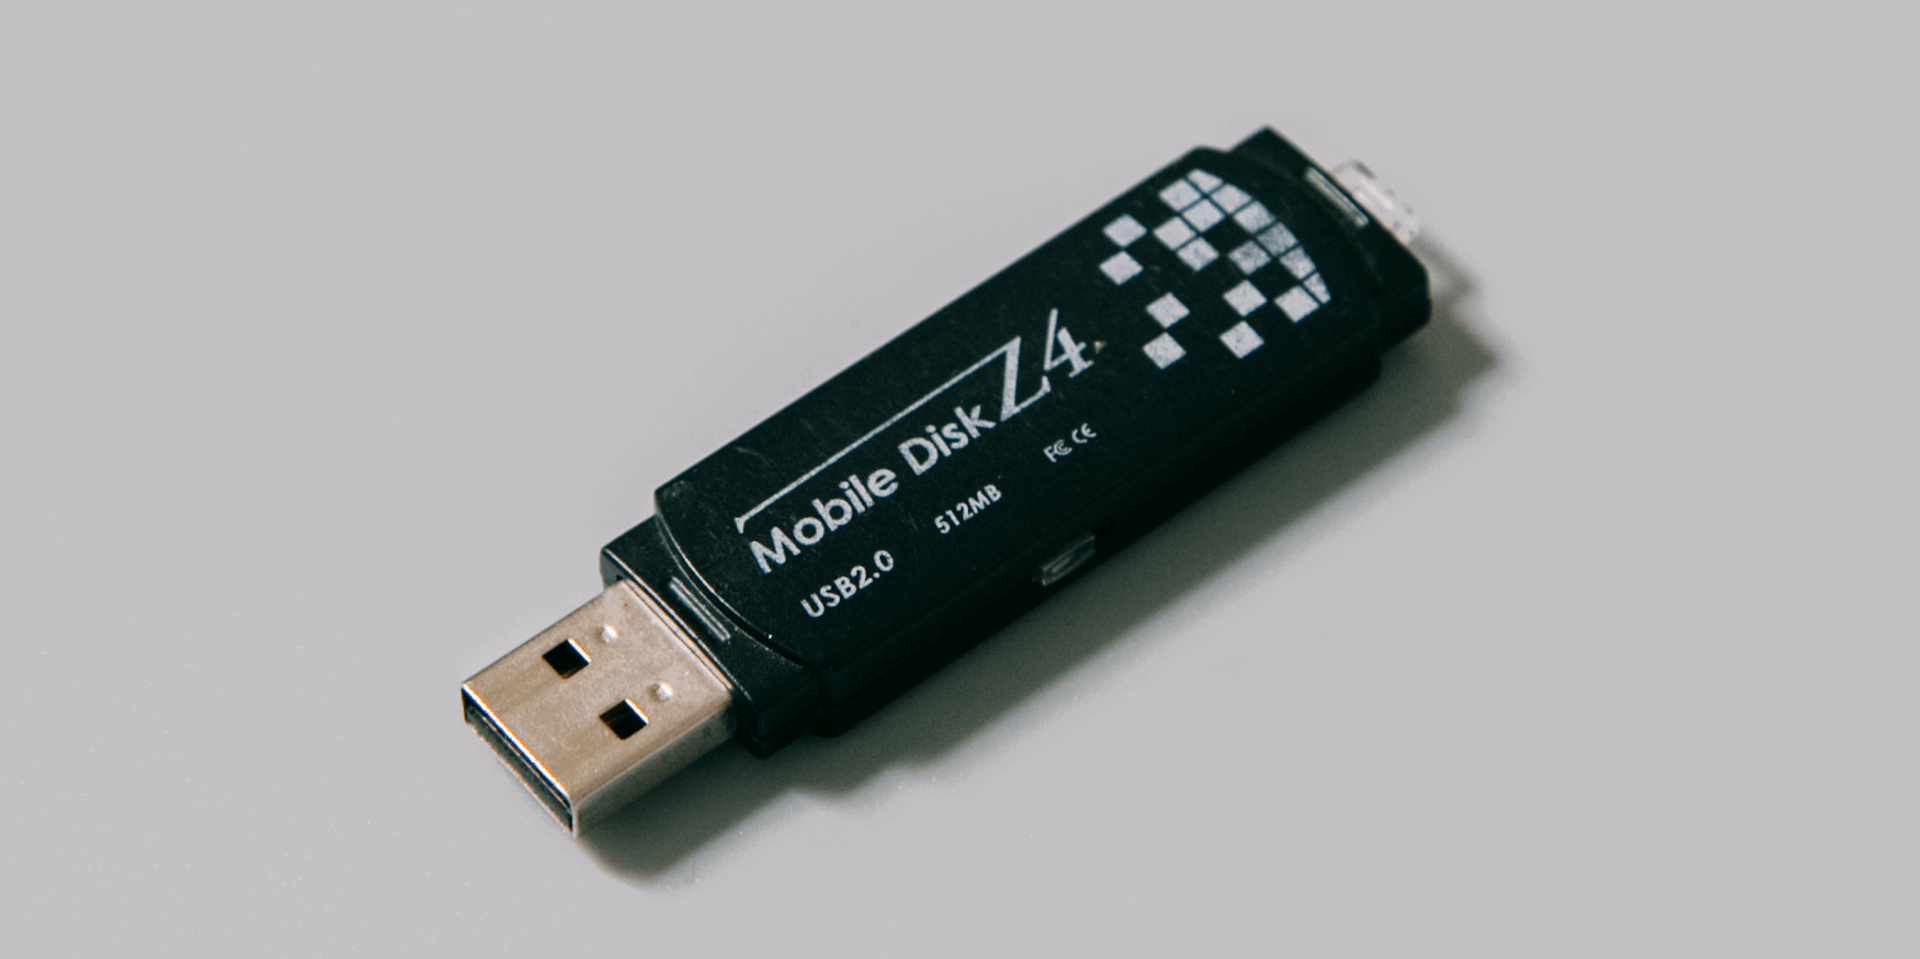 A USB drive on a gray background.